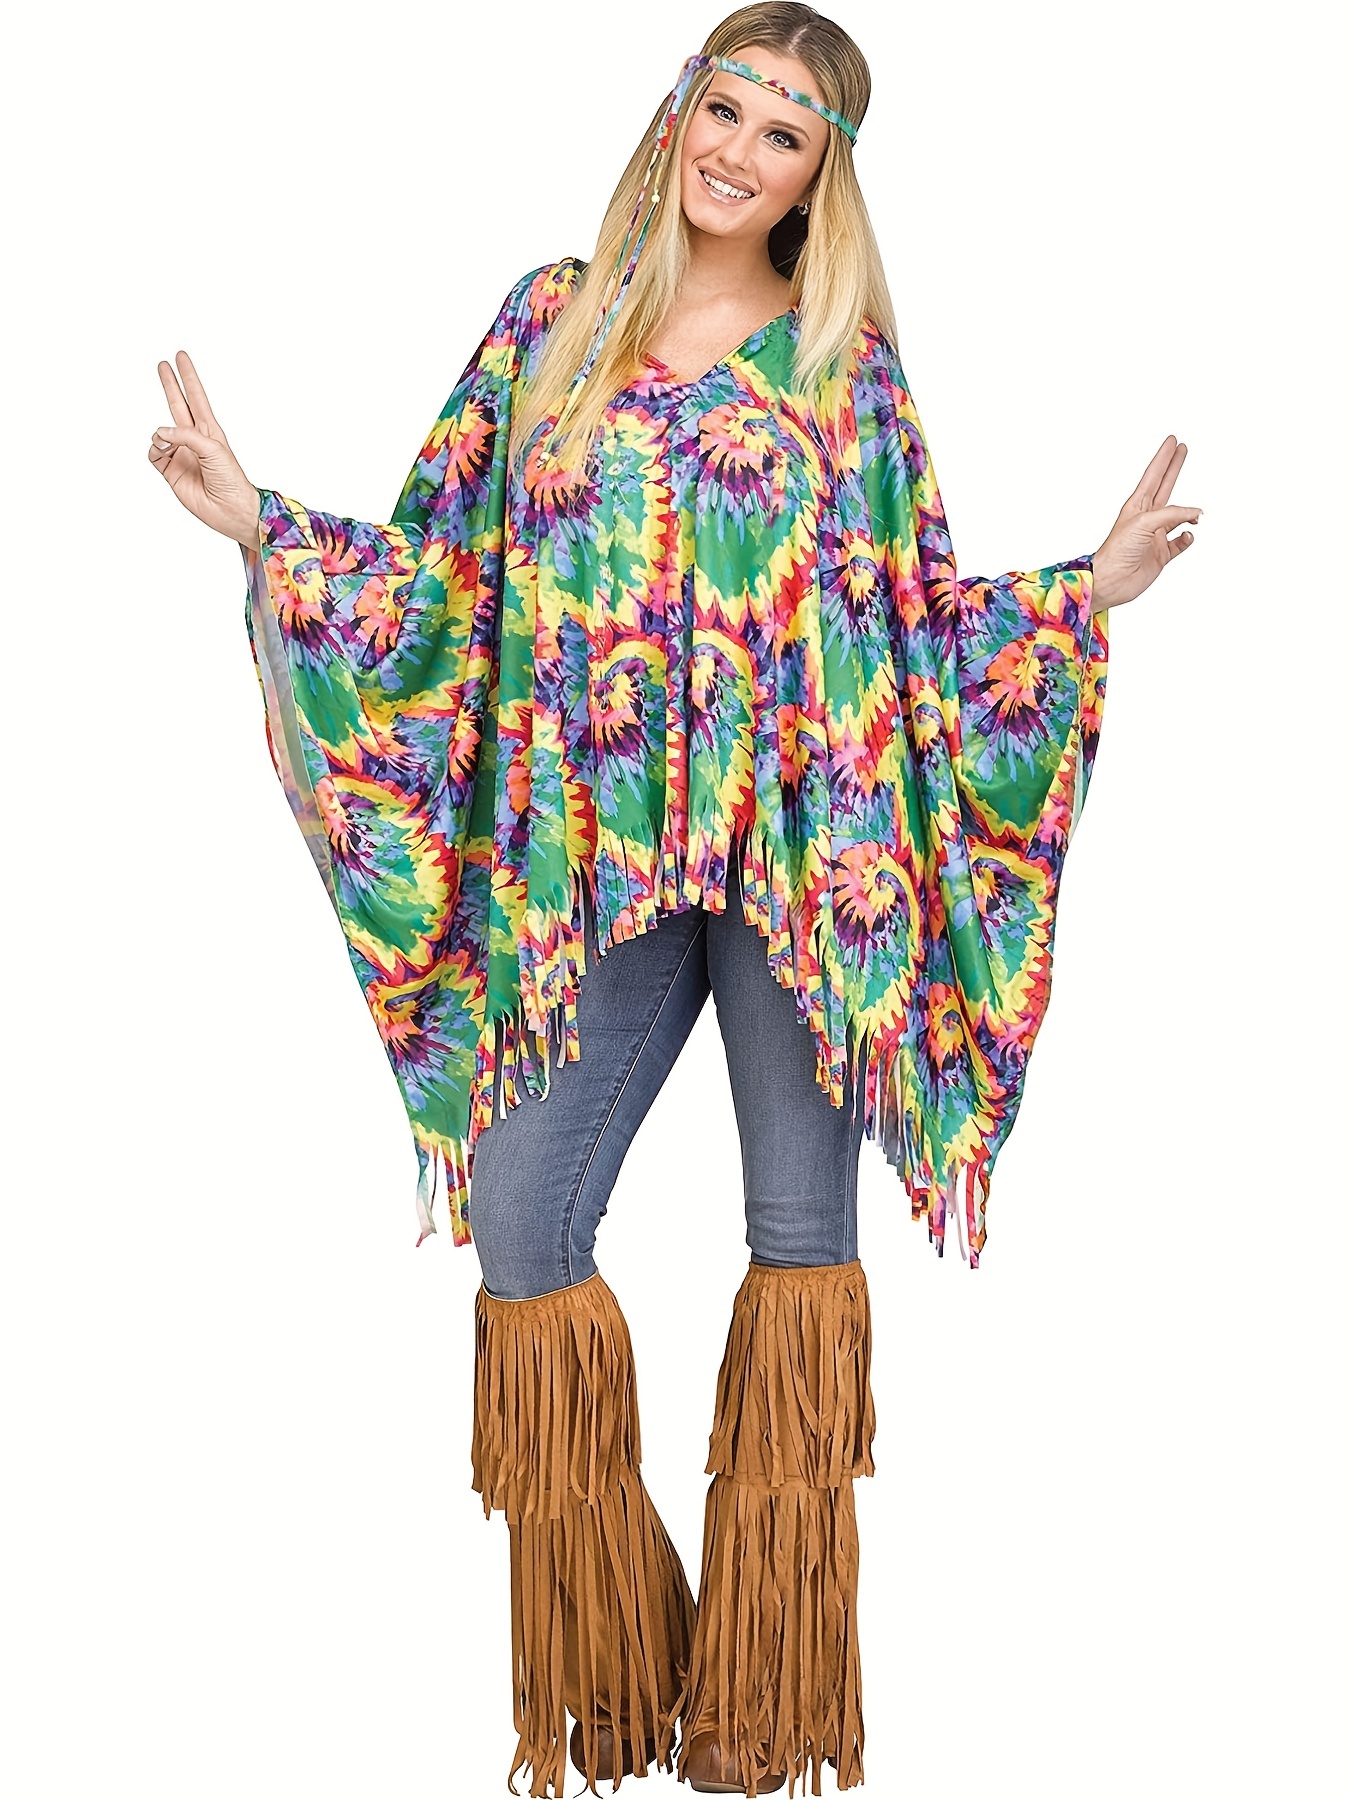 Ropa hippie Stock Photos, Royalty Free Ropa hippie Images